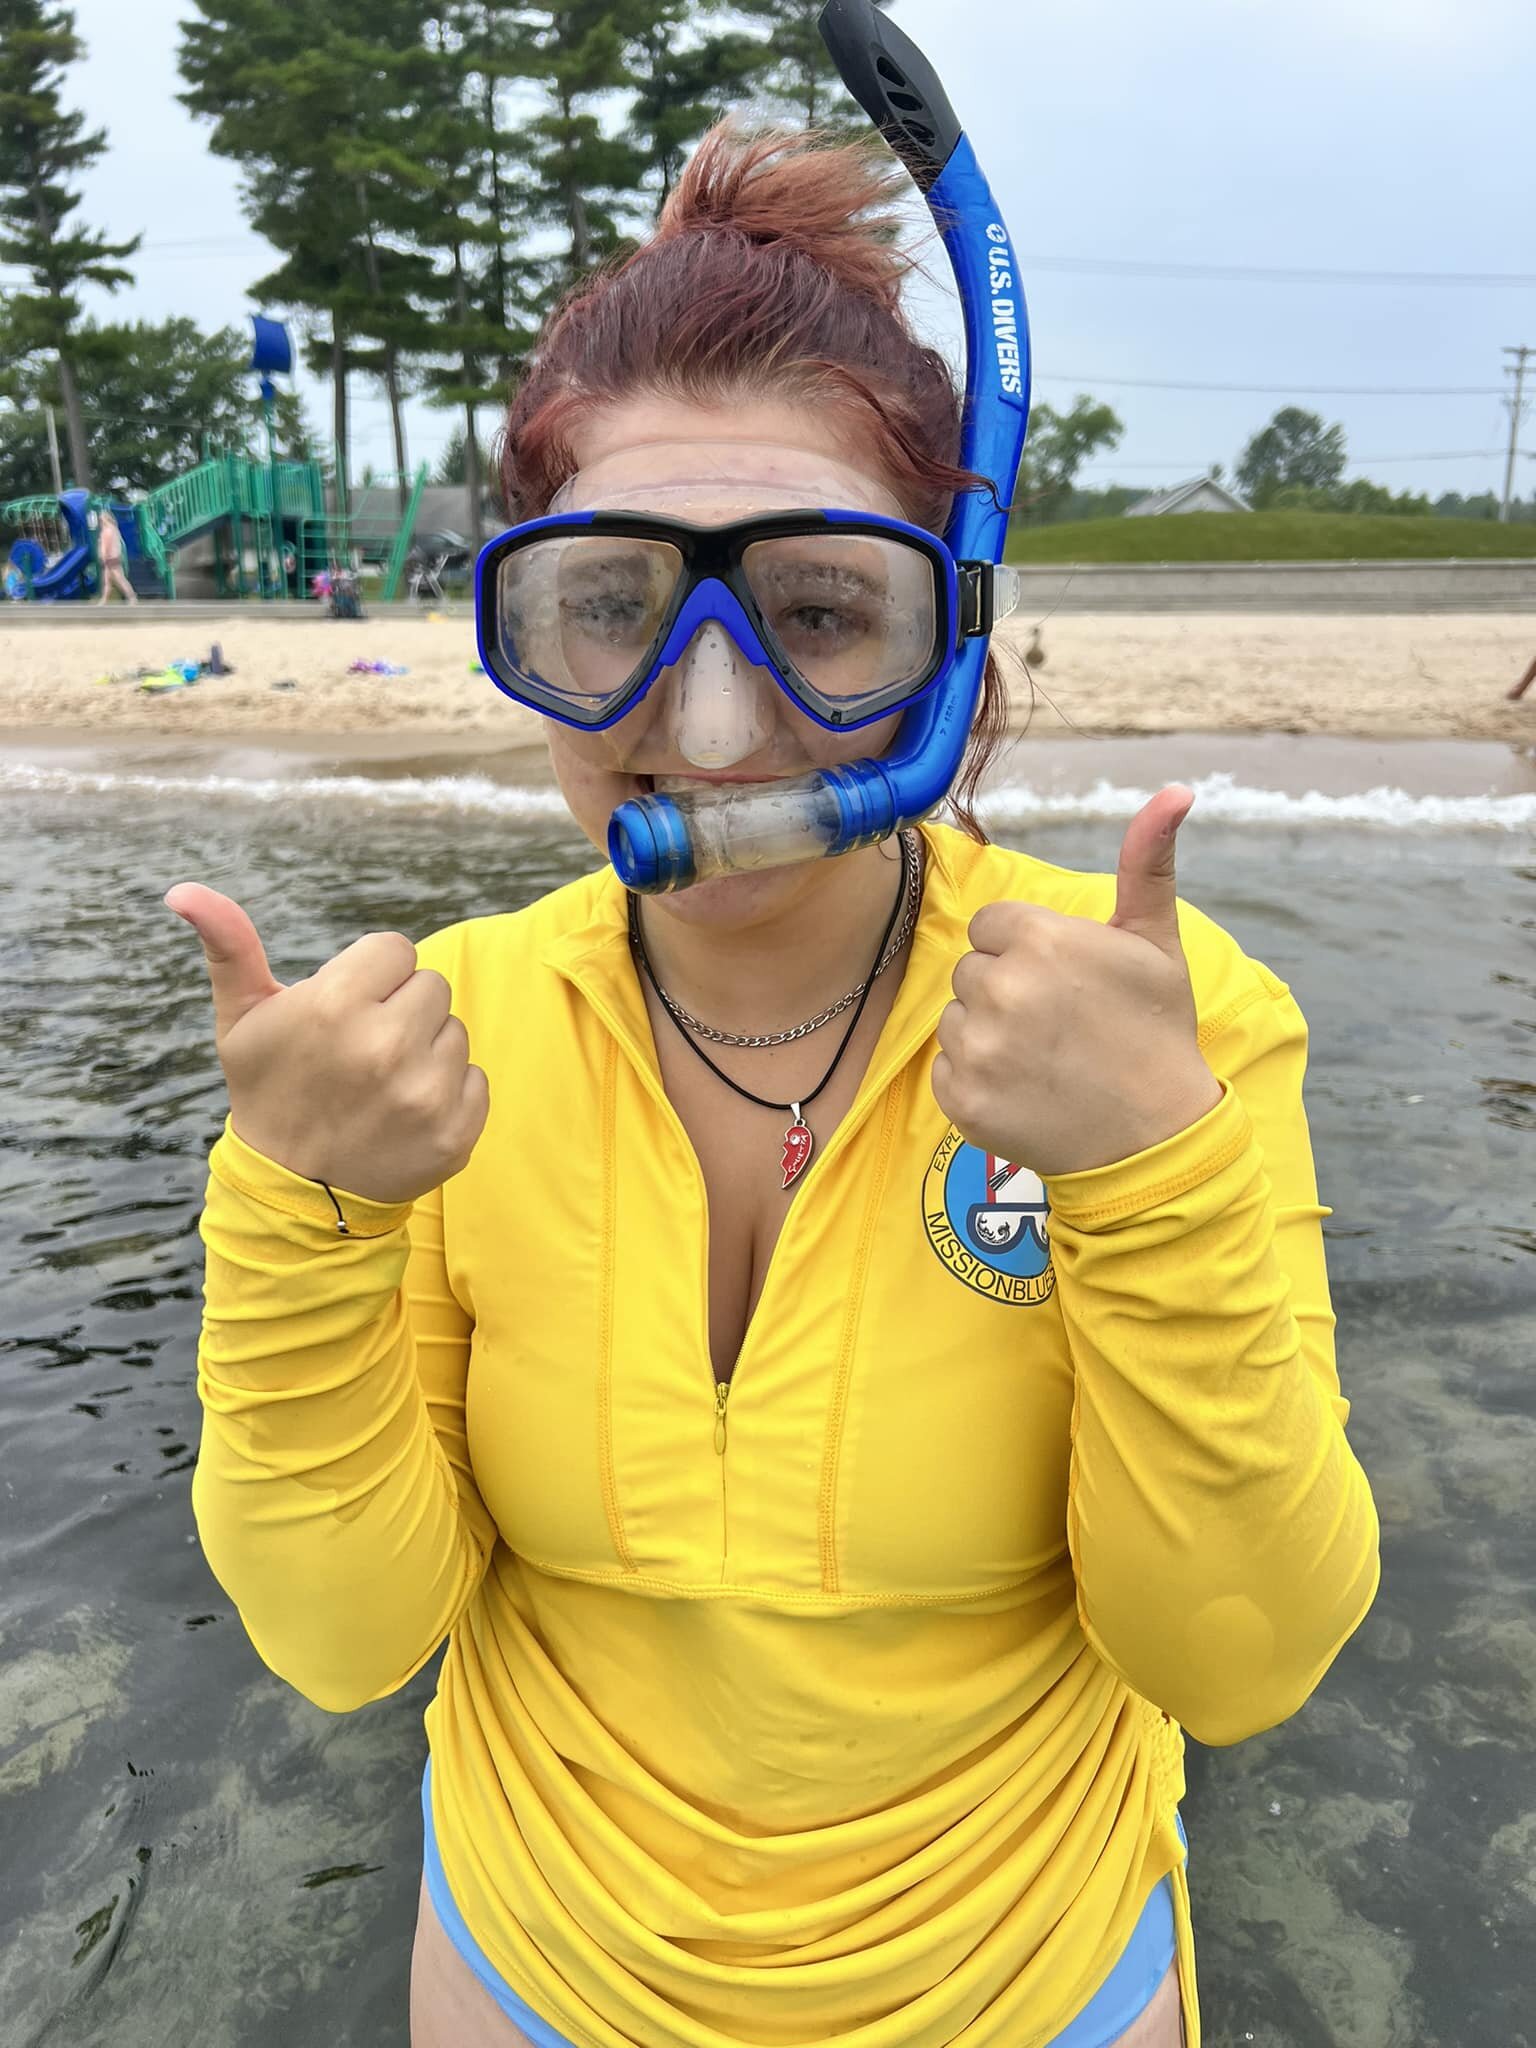 Evening Family snorkel tomorrow out at Haserot Beach! 5pm 🤿🤿🤿

Grab your gear and come on out. We&rsquo;ll have a few extra wetsuits available for those who want one